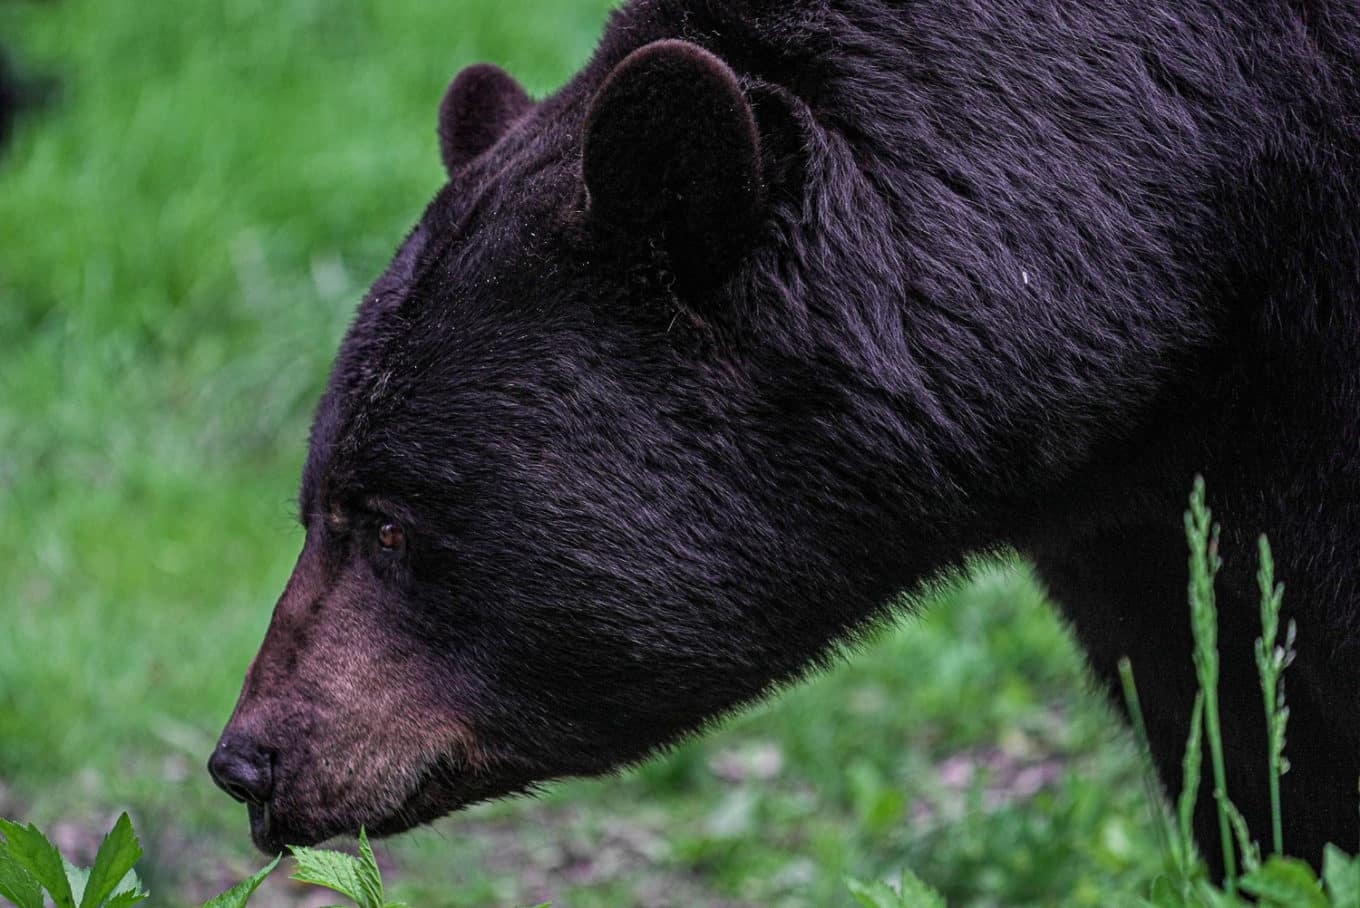 A black bear leans down to sniff the ground.